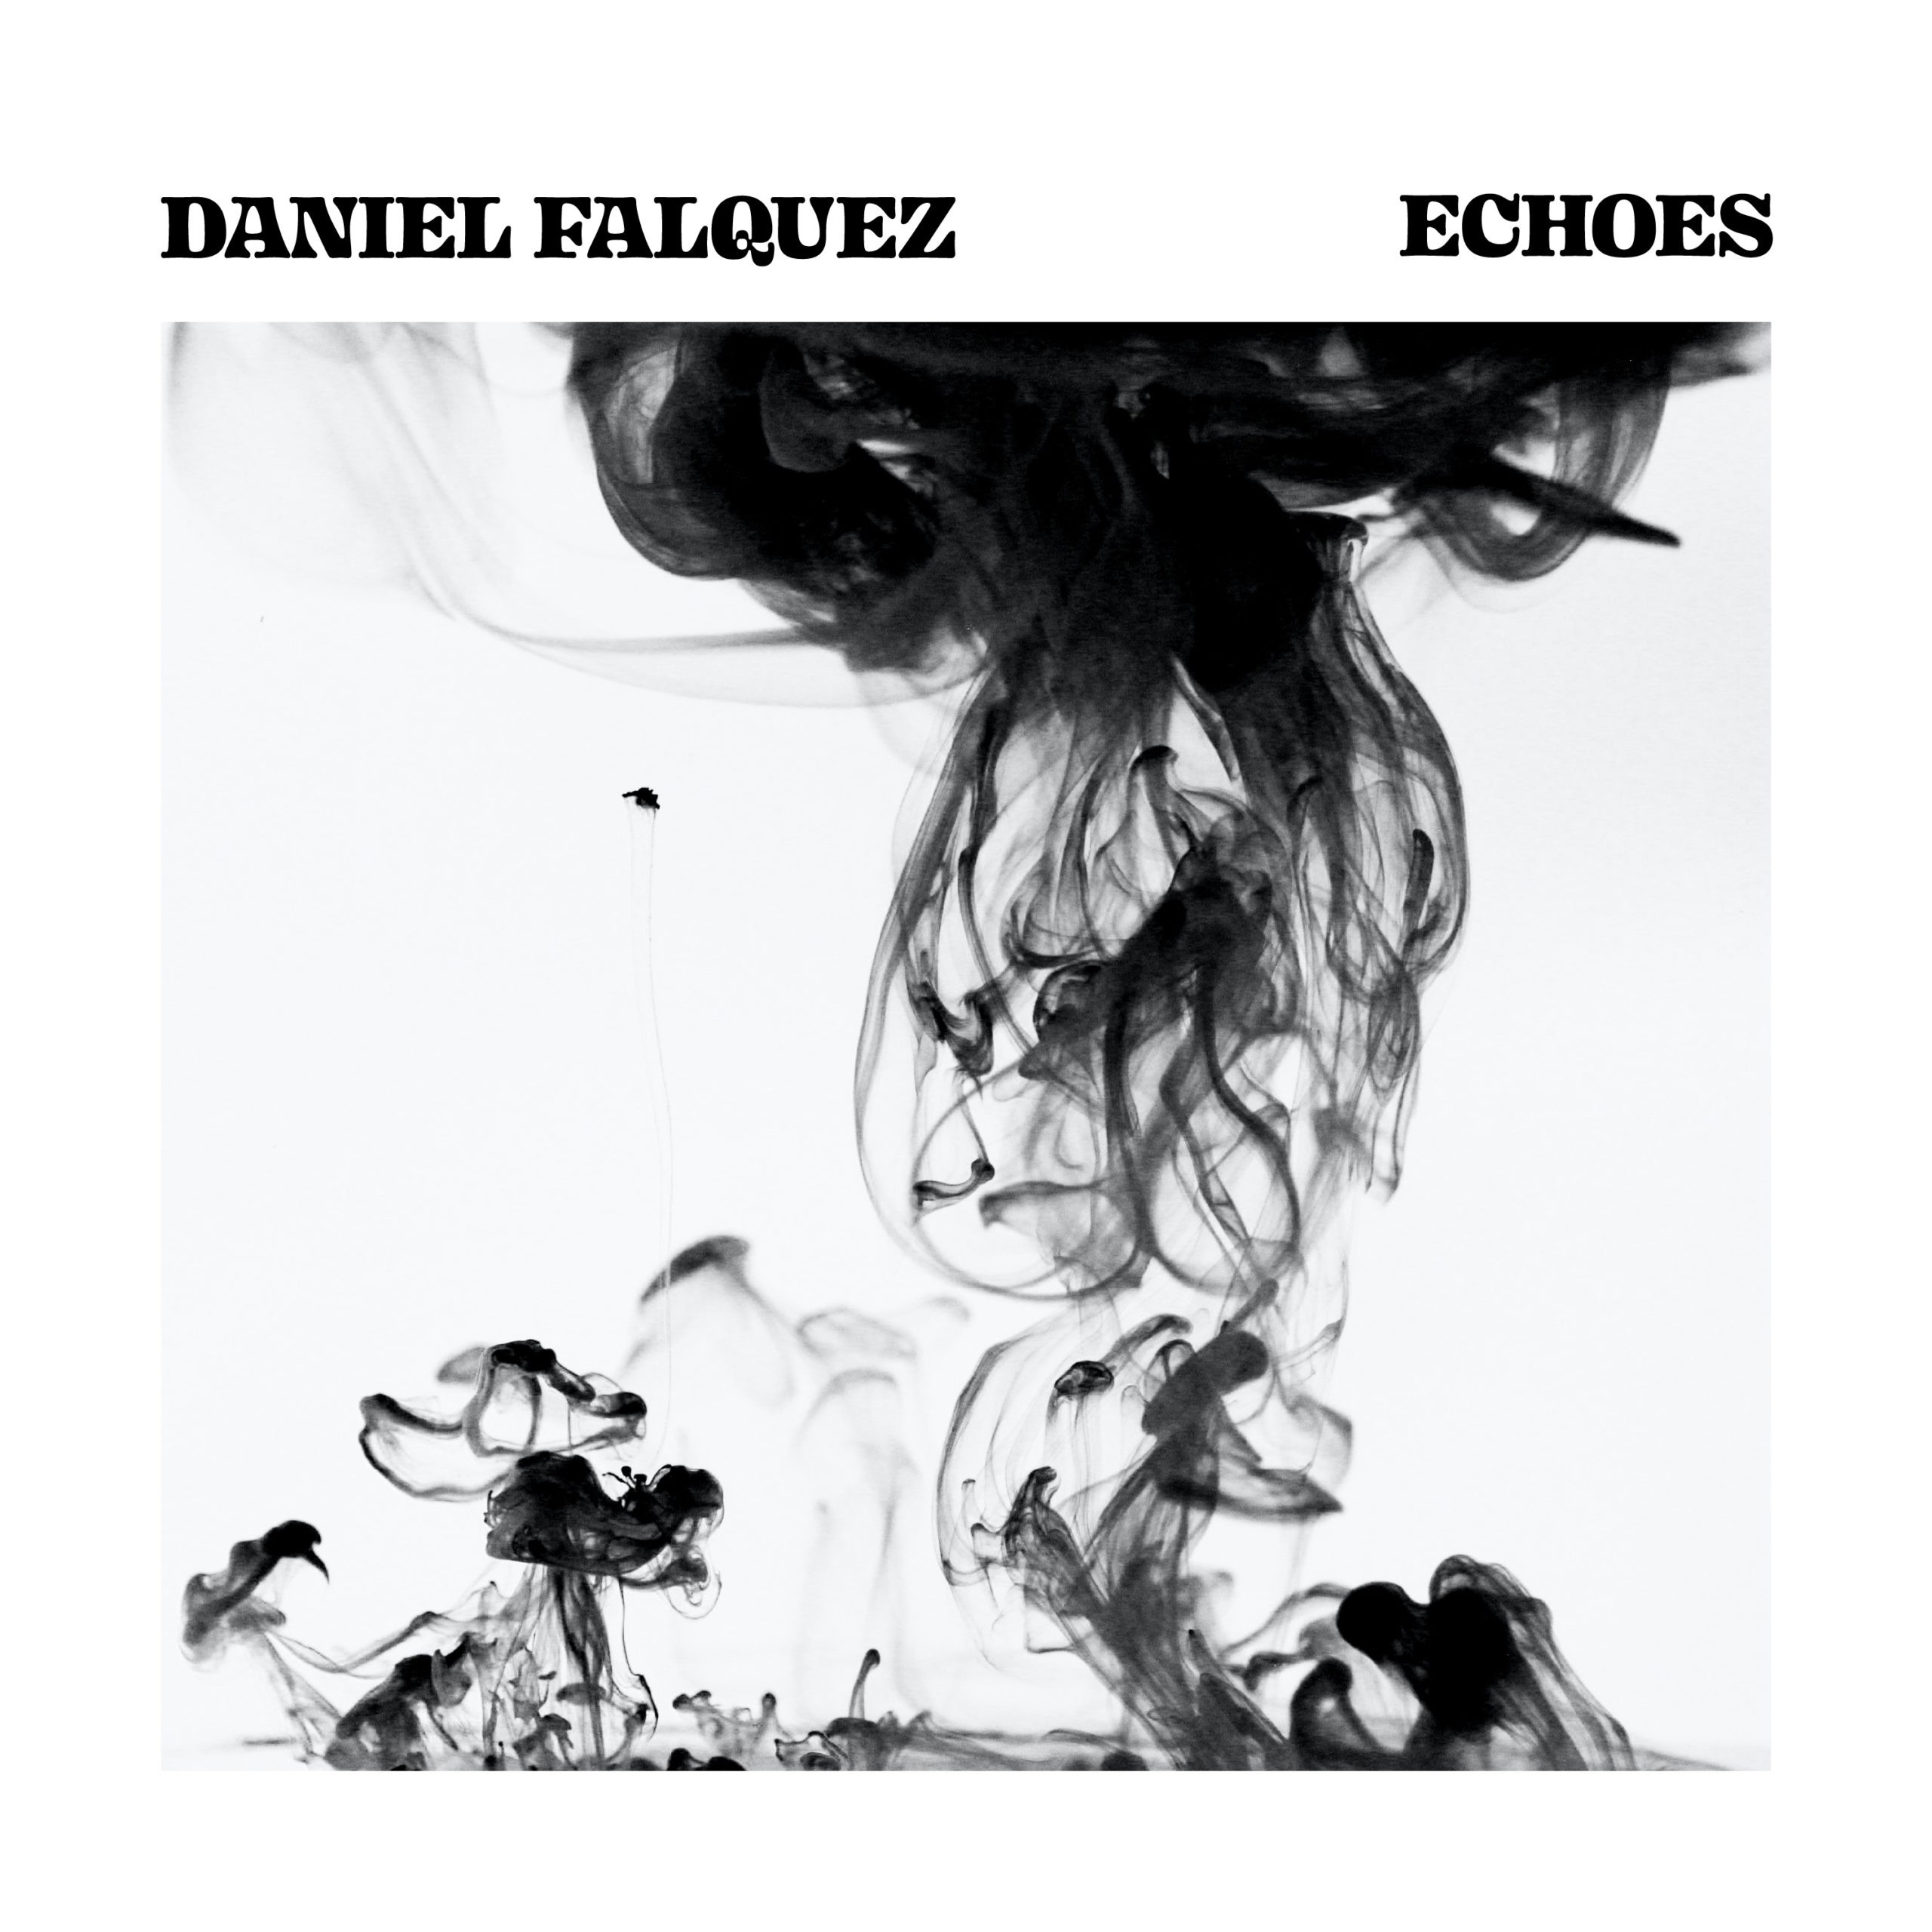 Daniel Falquez - "Echoes", a song that reflects on the ebbs and flows of life